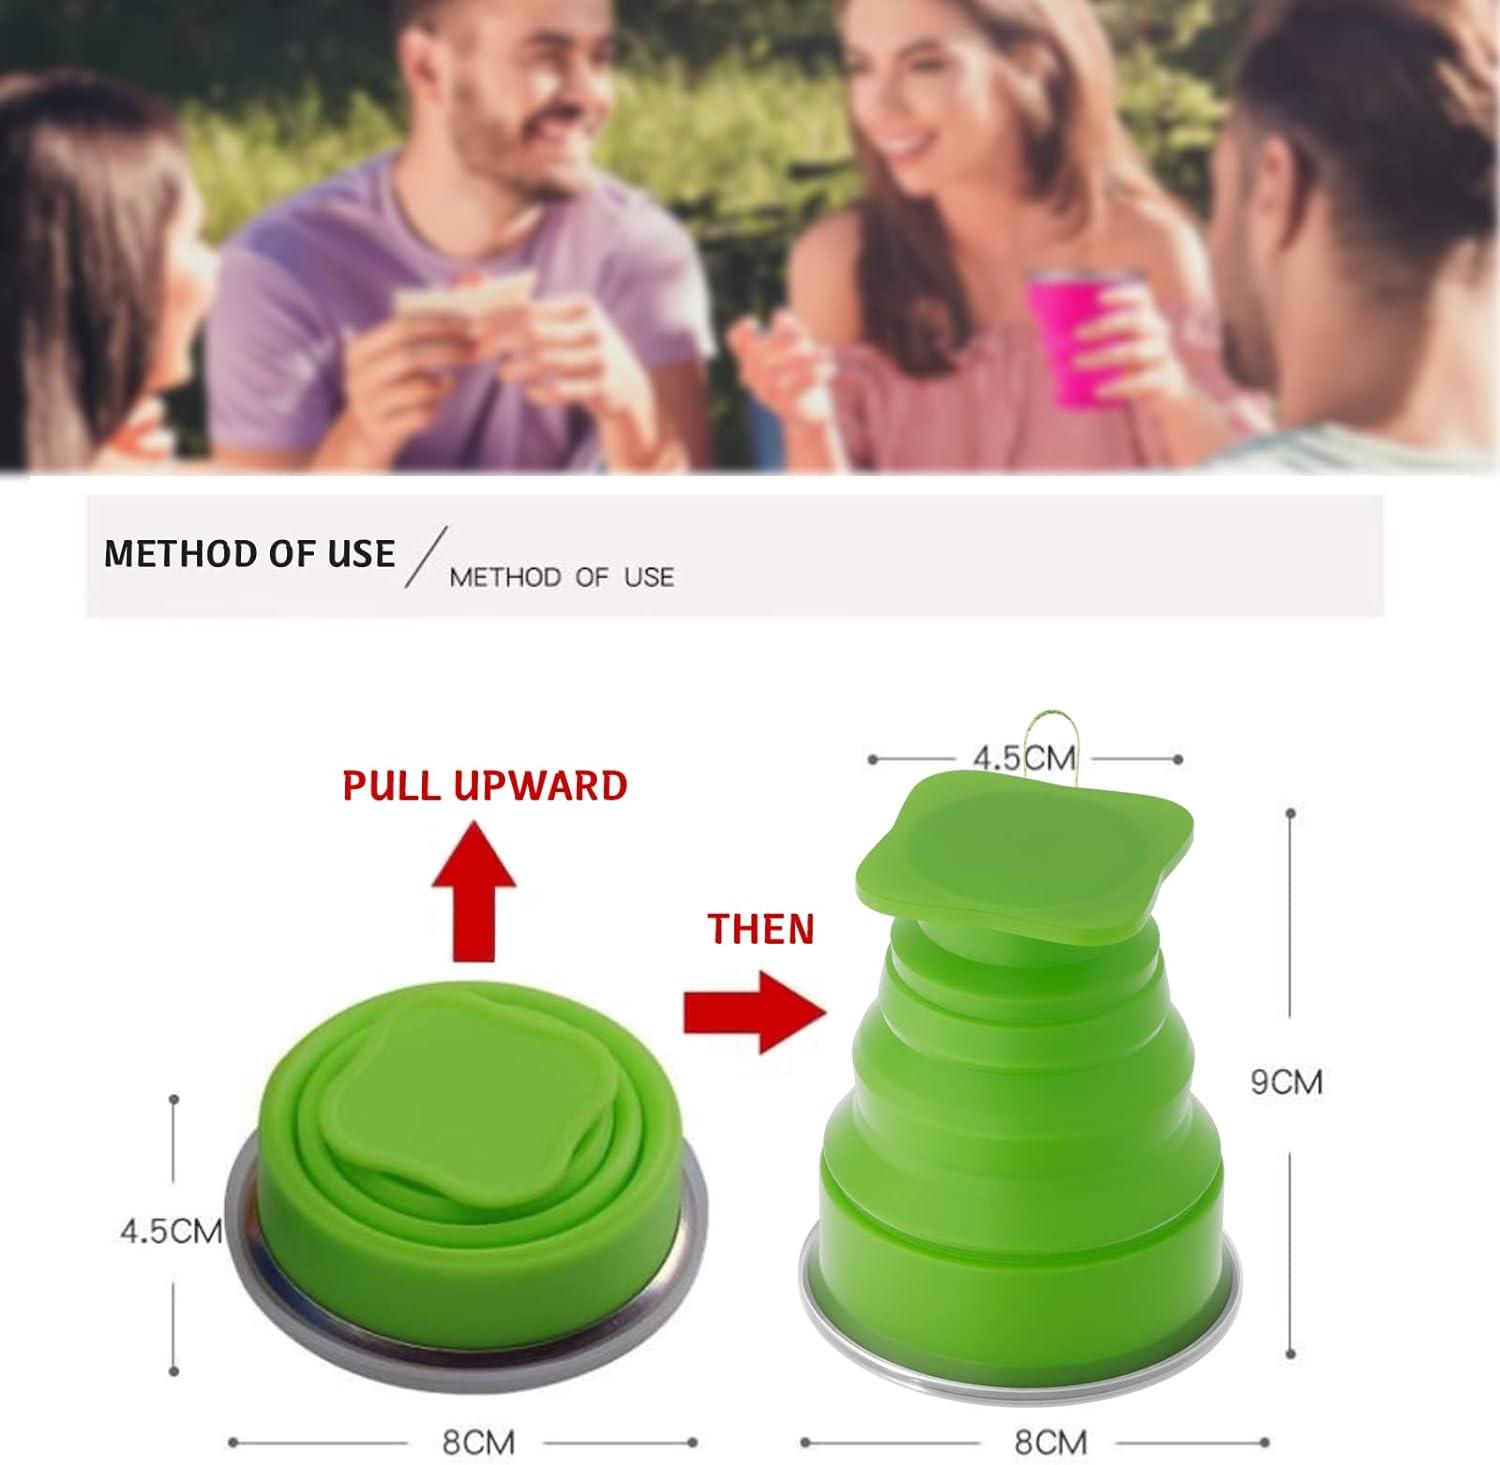 Collapsible Cup - Silicone Foldable Cup-Expandable Folding Drinking Cup  -Reusable Portable Mugs Cup For Travel, Camping, Hiking, Survival, Car